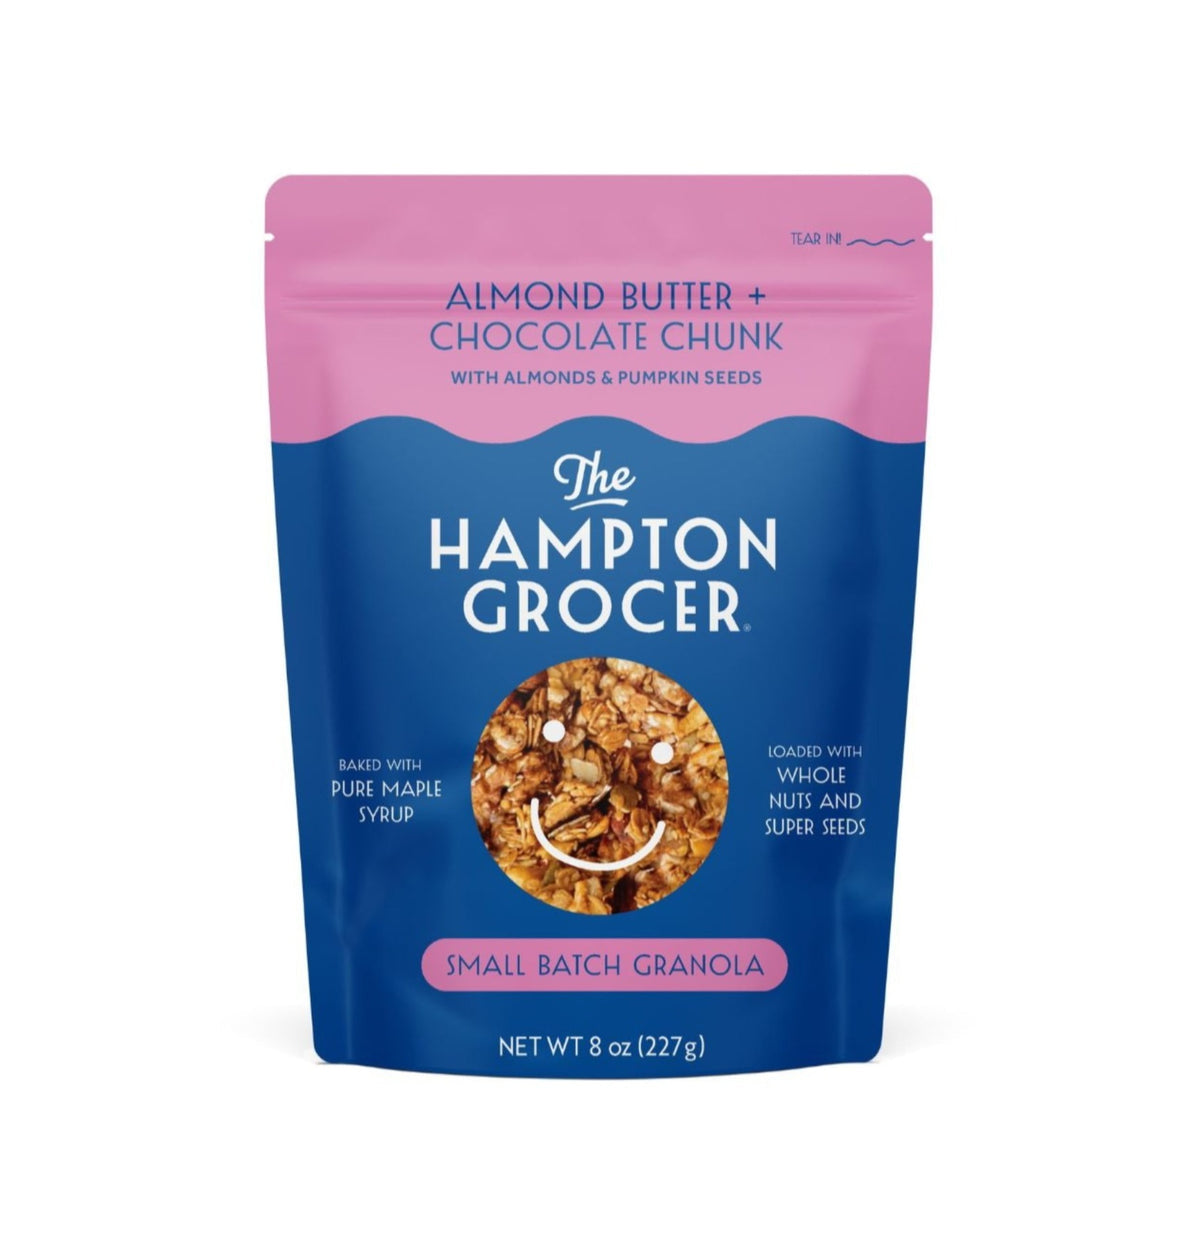 The Hampton Grocer - Almond Butter + Chocolate Chunk